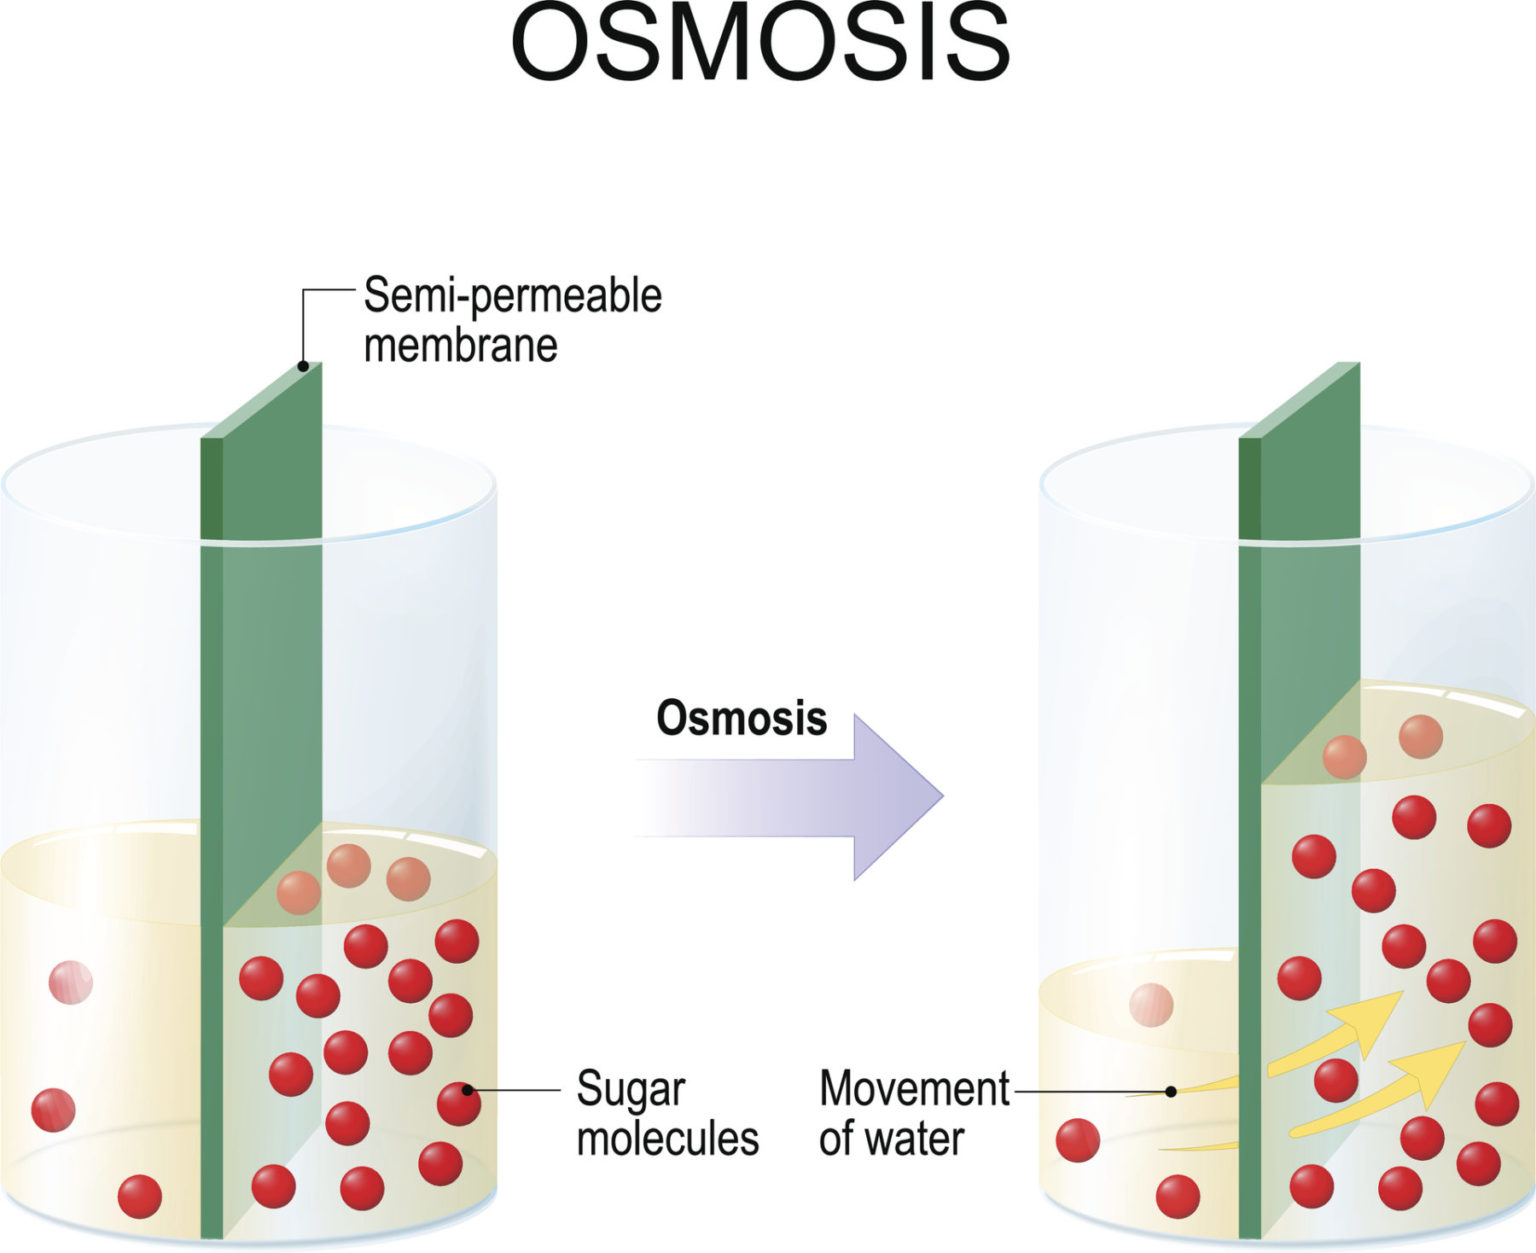 Osmosis, the process of water molecules moving through a semipermeable